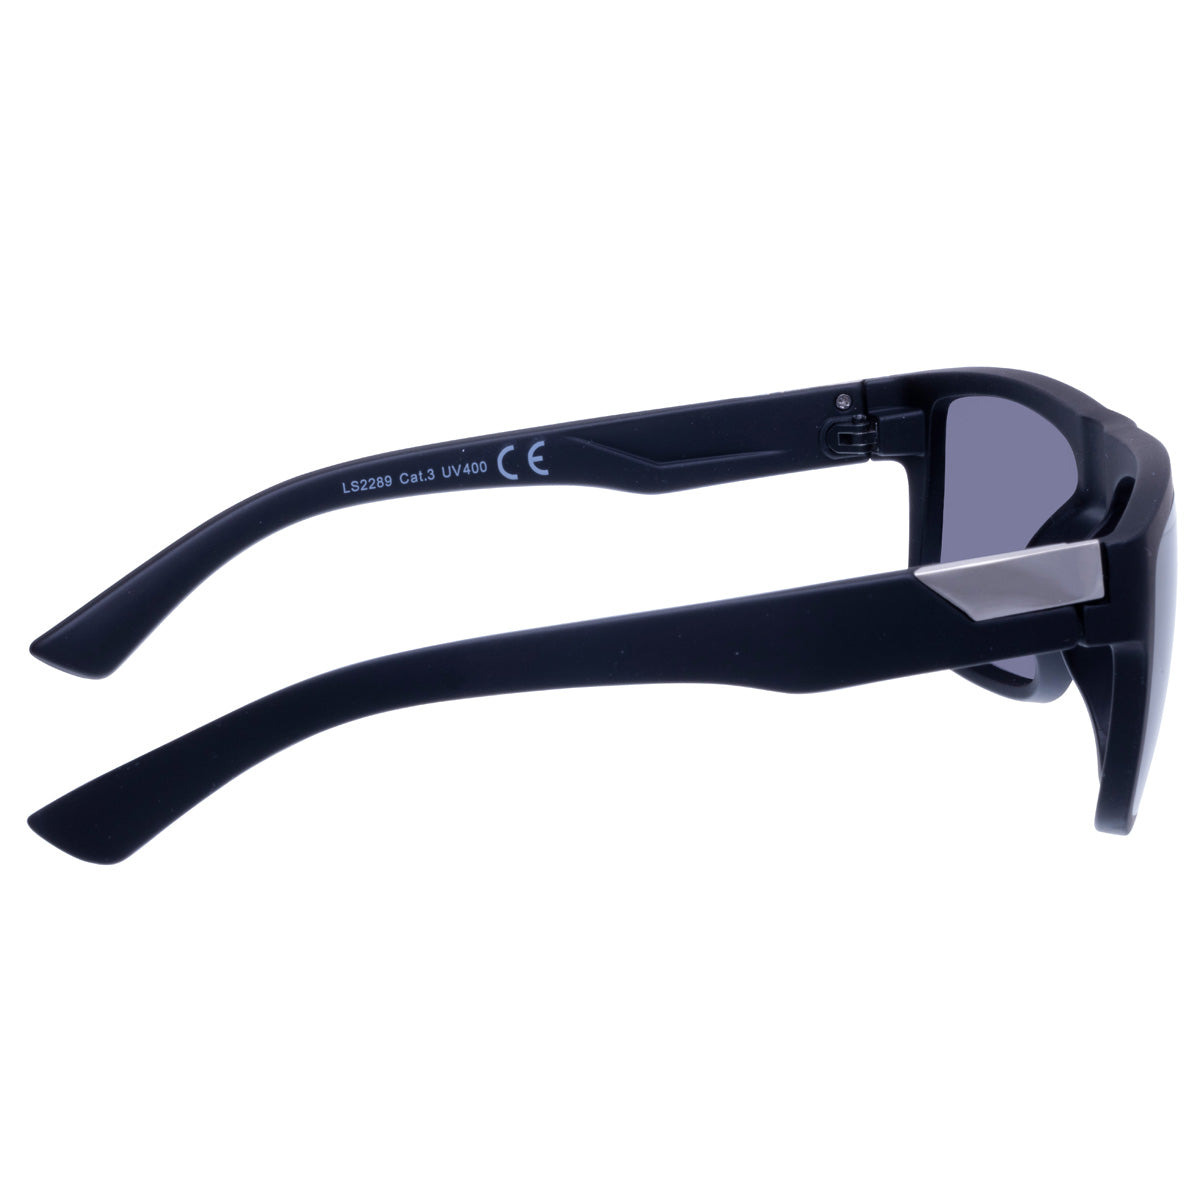 Curved low sunglasses flat top